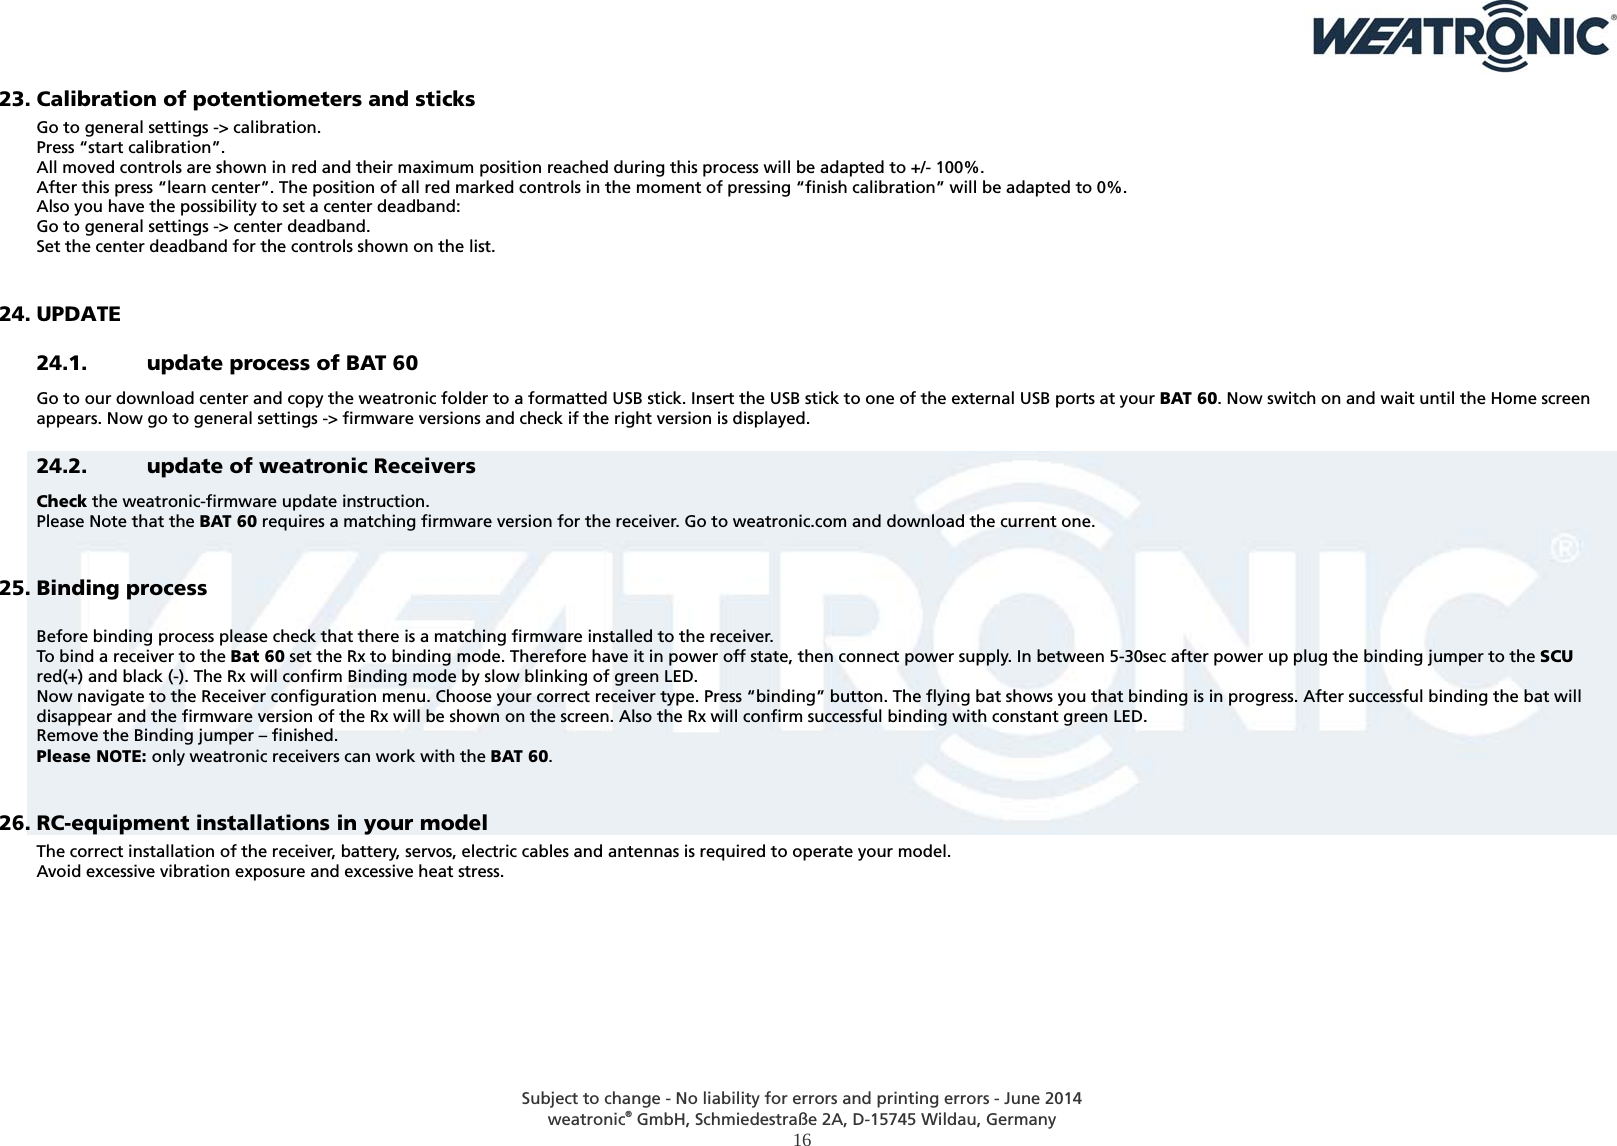  Subject to change - No liability for errors and printing errors - June 2014 weatronic® GmbH, Schmiedestraße 2A, D-15745 Wildau, Germany  16  23. Calibration of potentiometers and sticks Go to general settings -&gt; calibration. Press “start calibration”. All moved controls are shown in red and their maximum position reached during this process will be adapted to +/- 100%. After this press “learn center”. The position of all red marked controls in the moment of pressing “finish calibration” will be adapted to 0%. Also you have the possibility to set a center deadband: Go to general settings -&gt; center deadband. Set the center deadband for the controls shown on the list.  24. UPDATE 24.1. update process of BAT 60 Go to our download center and copy the weatronic folder to a formatted USB stick. Insert the USB stick to one of the external USB ports at your BAT 60. Now switch on and wait until the Home screen appears. Now go to general settings -&gt; firmware versions and check if the right version is displayed.  24.2. update of weatronic Receivers Check the weatronic-firmware update instruction.  Please Note that the BAT 60 requires a matching firmware version for the receiver. Go to weatronic.com and download the current one.  25. Binding process  Before binding process please check that there is a matching firmware installed to the receiver. To bind a receiver to the Bat 60 set the Rx to binding mode. Therefore have it in power off state, then connect power supply. In between 5-30sec after power up plug the binding jumper to the SCU red(+) and black (-). The Rx will confirm Binding mode by slow blinking of green LED. Now navigate to the Receiver configuration menu. Choose your correct receiver type. Press “binding” button. The flying bat shows you that binding is in progress. After successful binding the bat will disappear and the firmware version of the Rx will be shown on the screen. Also the Rx will confirm successful binding with constant green LED. Remove the Binding jumper – finished. Please NOTE: only weatronic receivers can work with the BAT 60.  26. RC-equipment installations in your model The correct installation of the receiver, battery, servos, electric cables and antennas is required to operate your model.  Avoid excessive vibration exposure and excessive heat stress.  